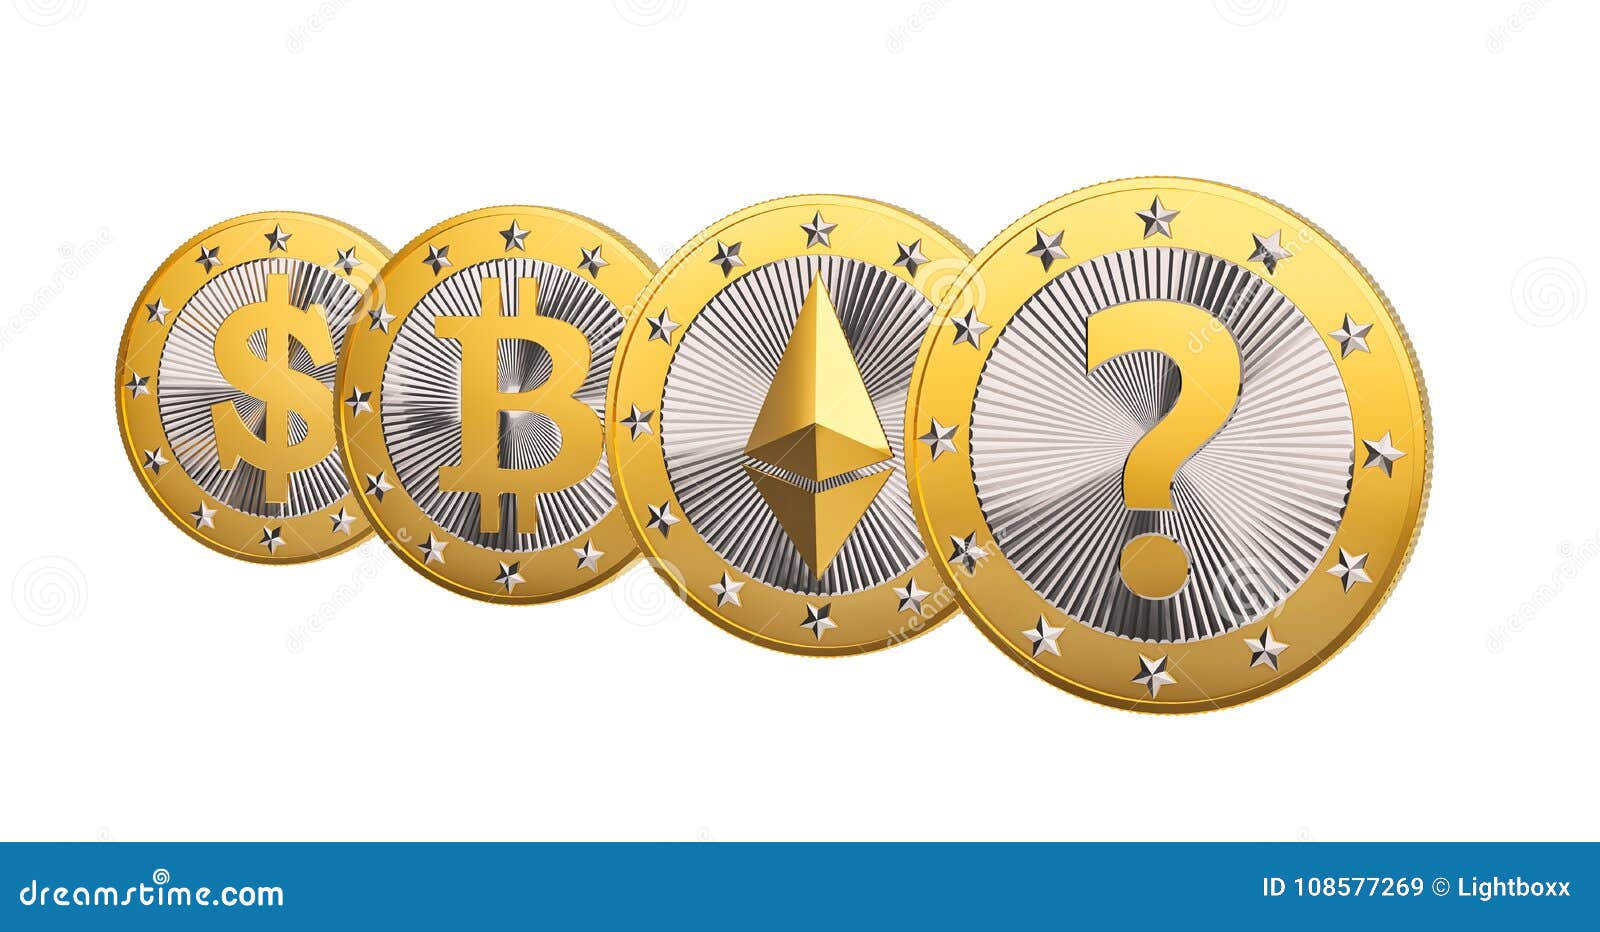 What is the next big thing in cryptocurrency ethereum setup on linux private network